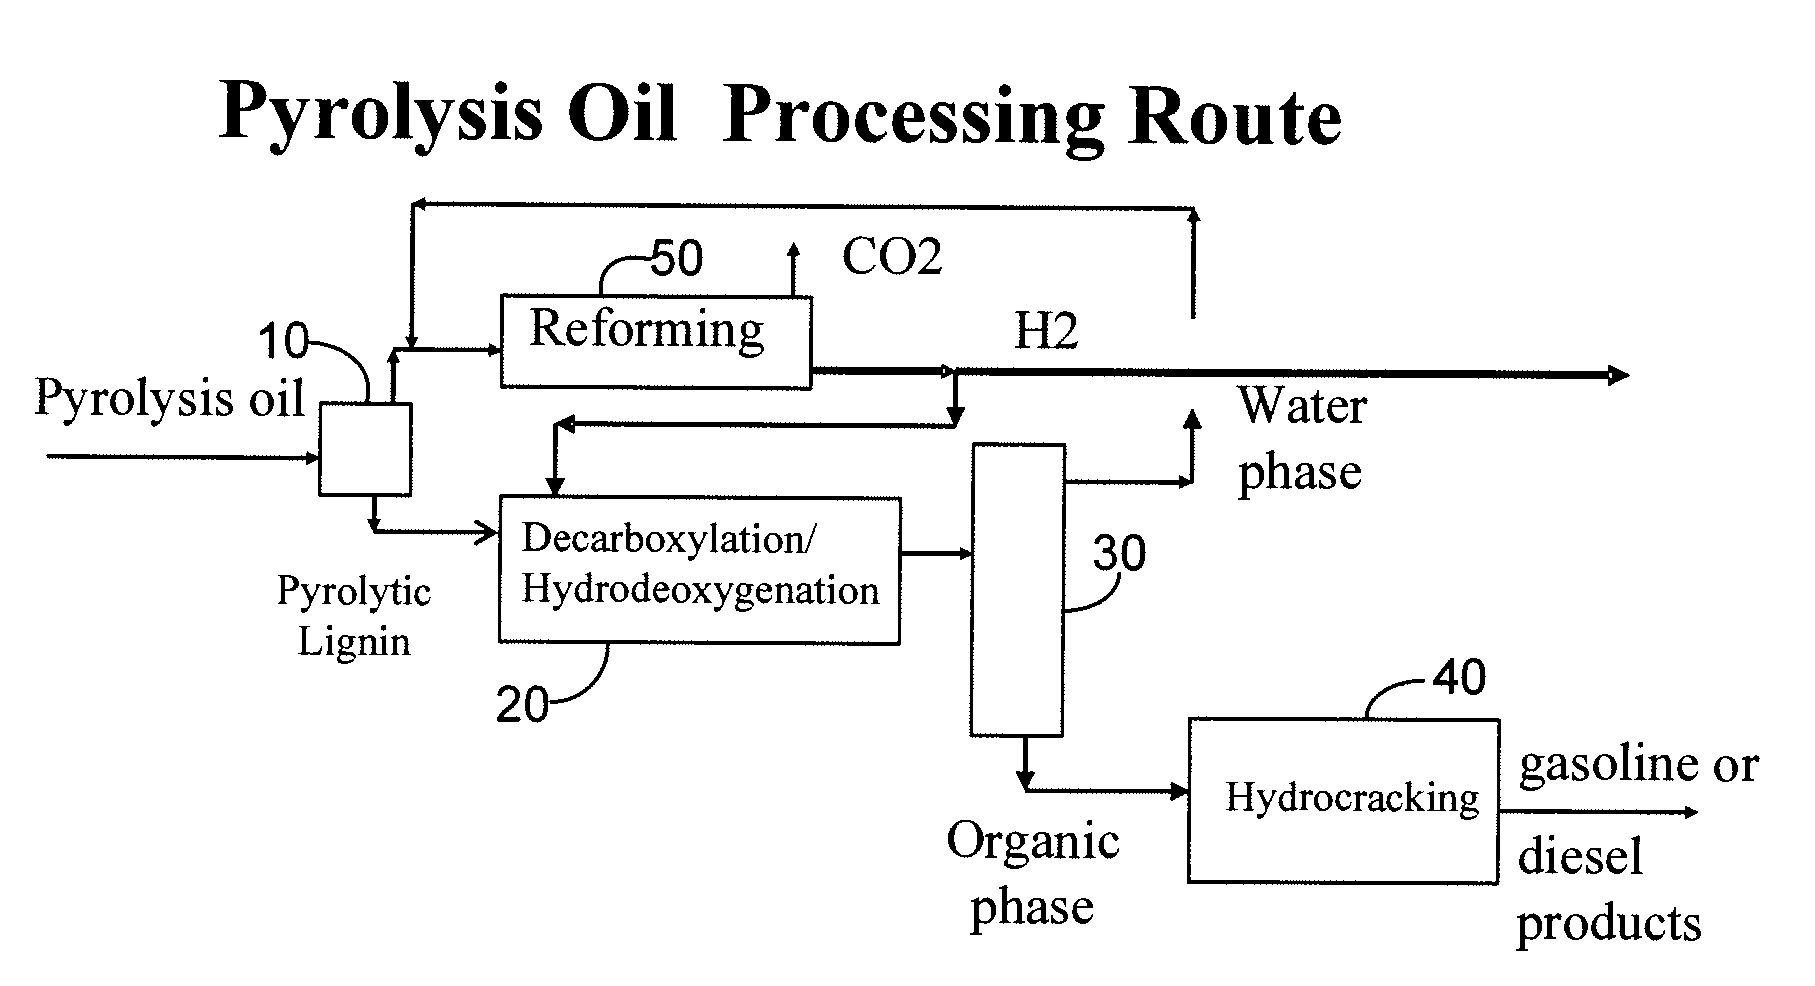 Gasoline and diesel production from pyrolytic lignin produced from pyrolysis of cellulosic waste